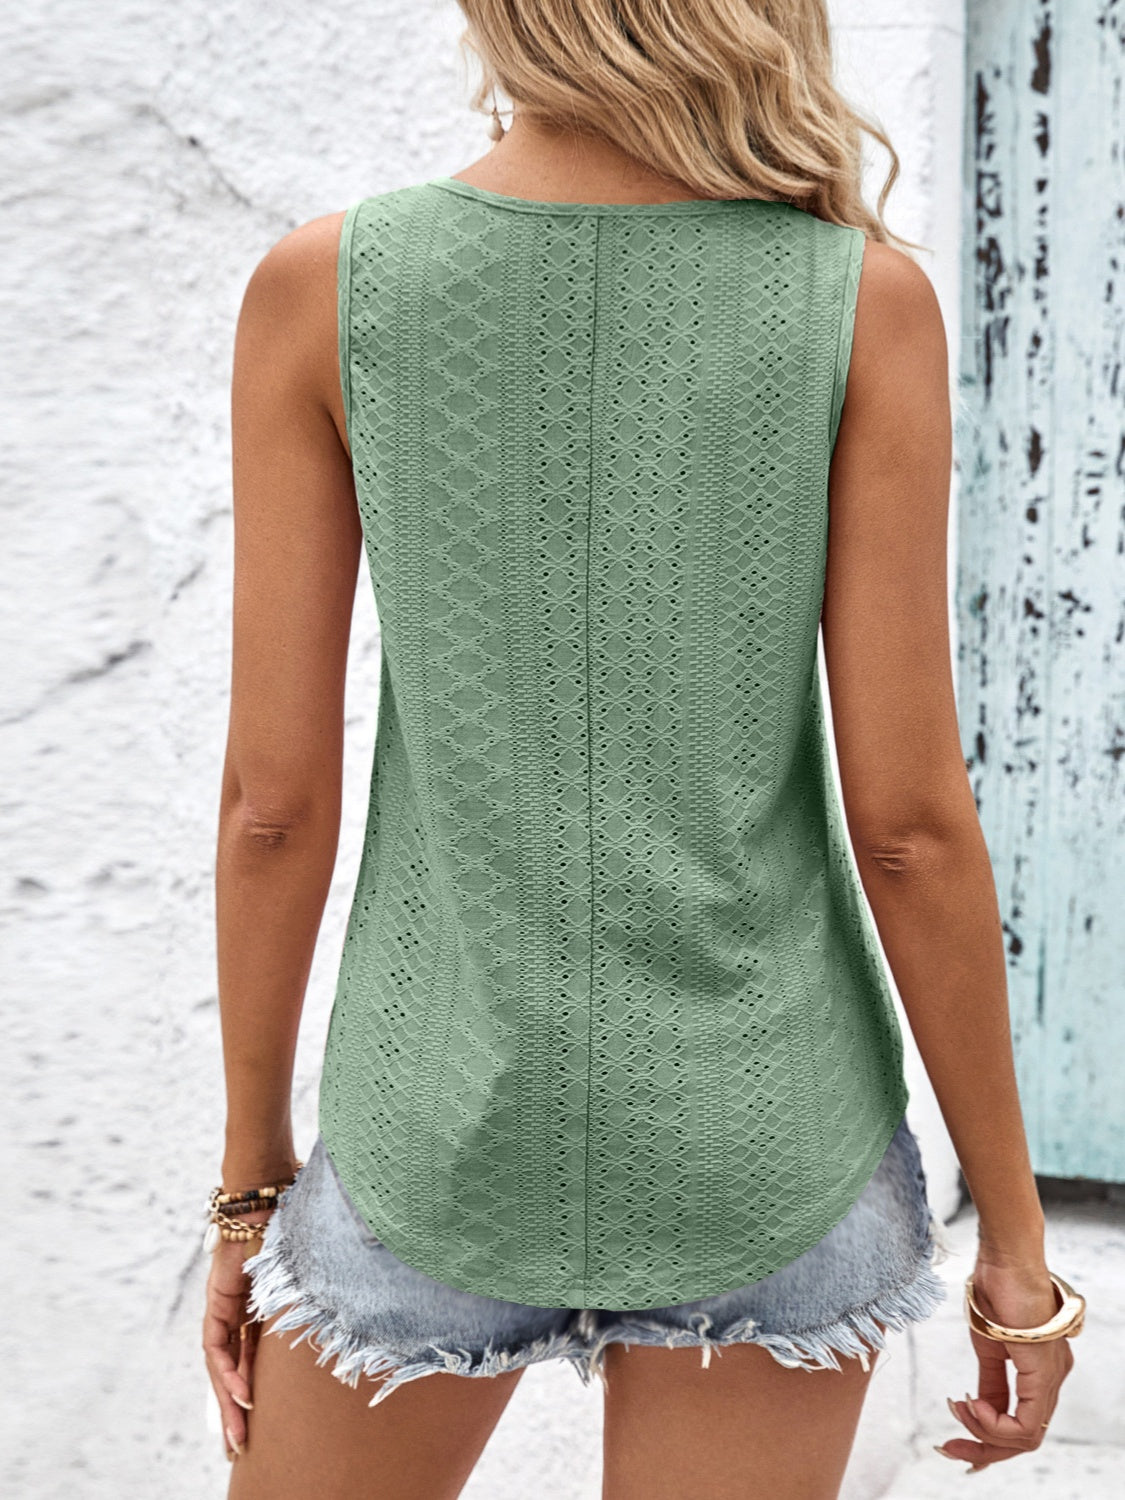 Elevate your style with our Eyelet Wide Strap Tank, available in mauve, black, white, and sage. Perfect for any occasion!